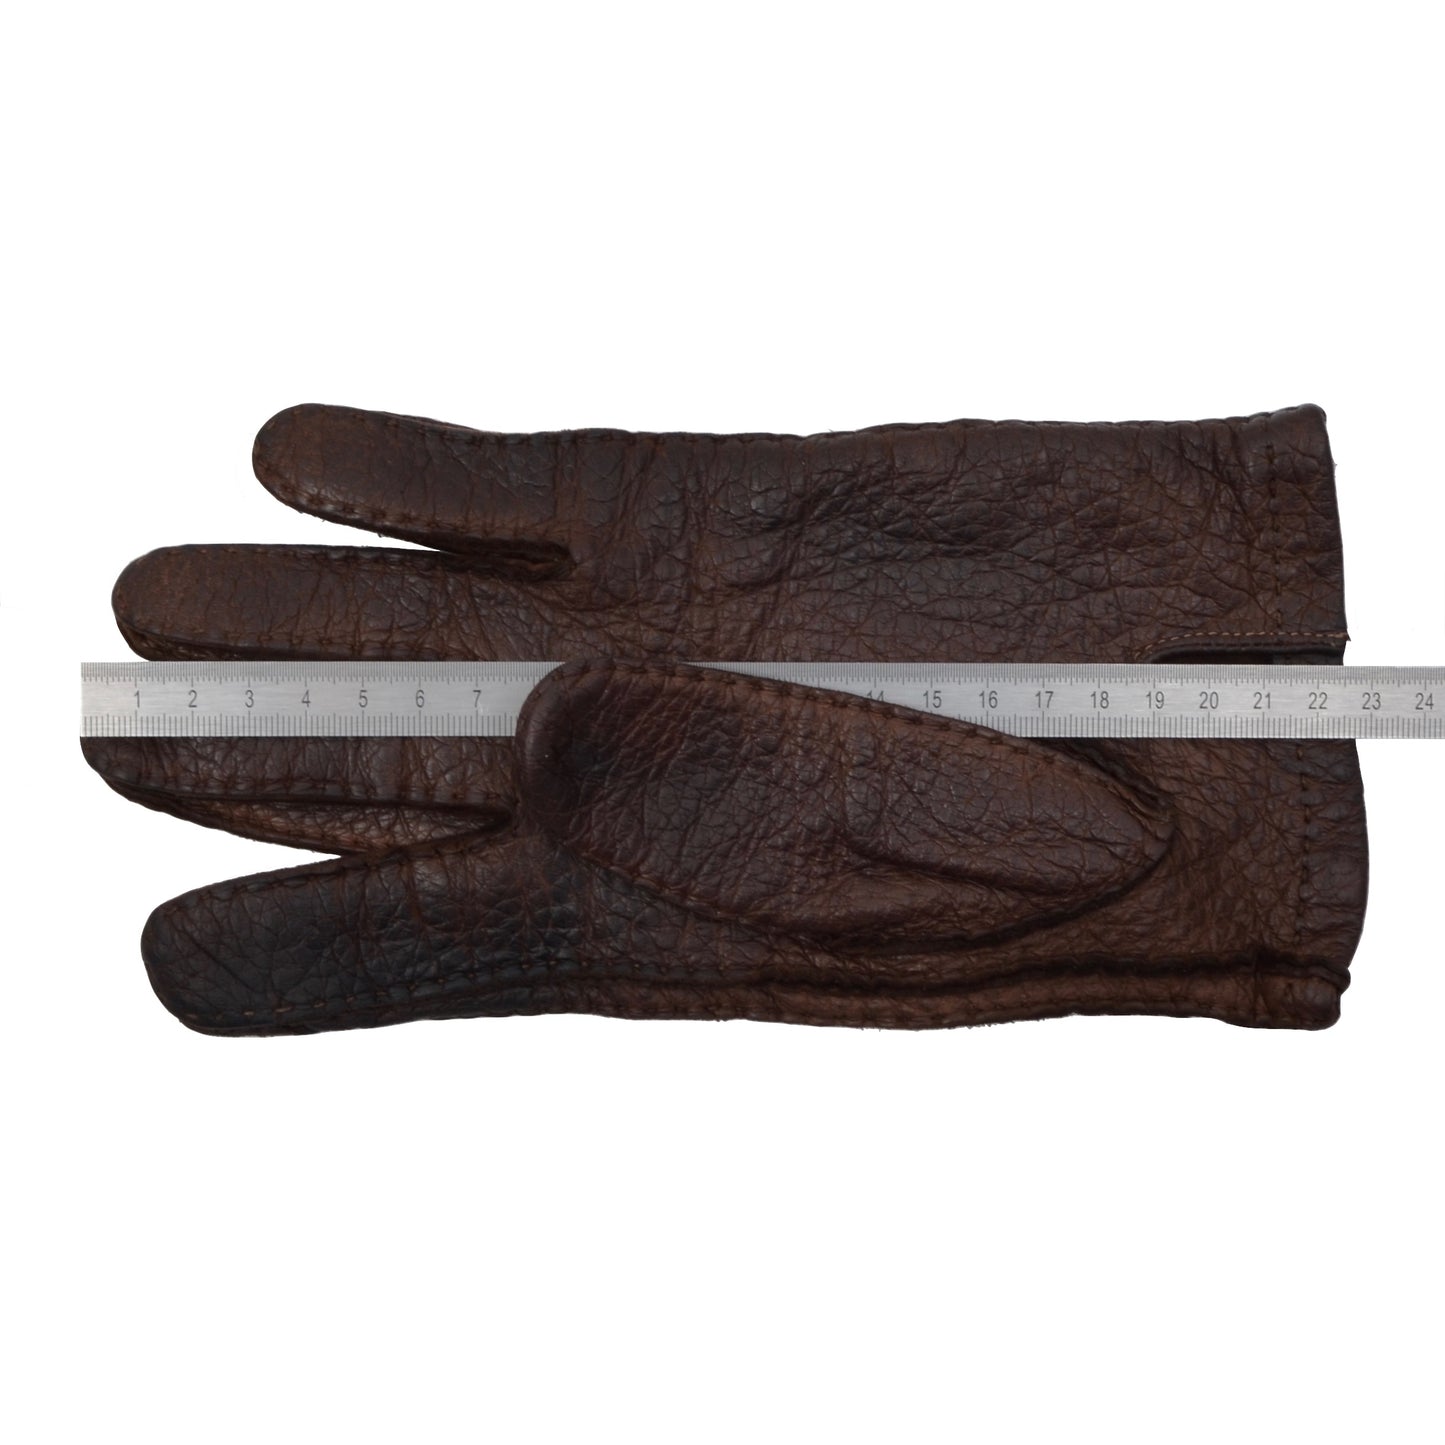 Unlined Peccary Leather Gloves Size 8 1/4 - Chocolate Brown